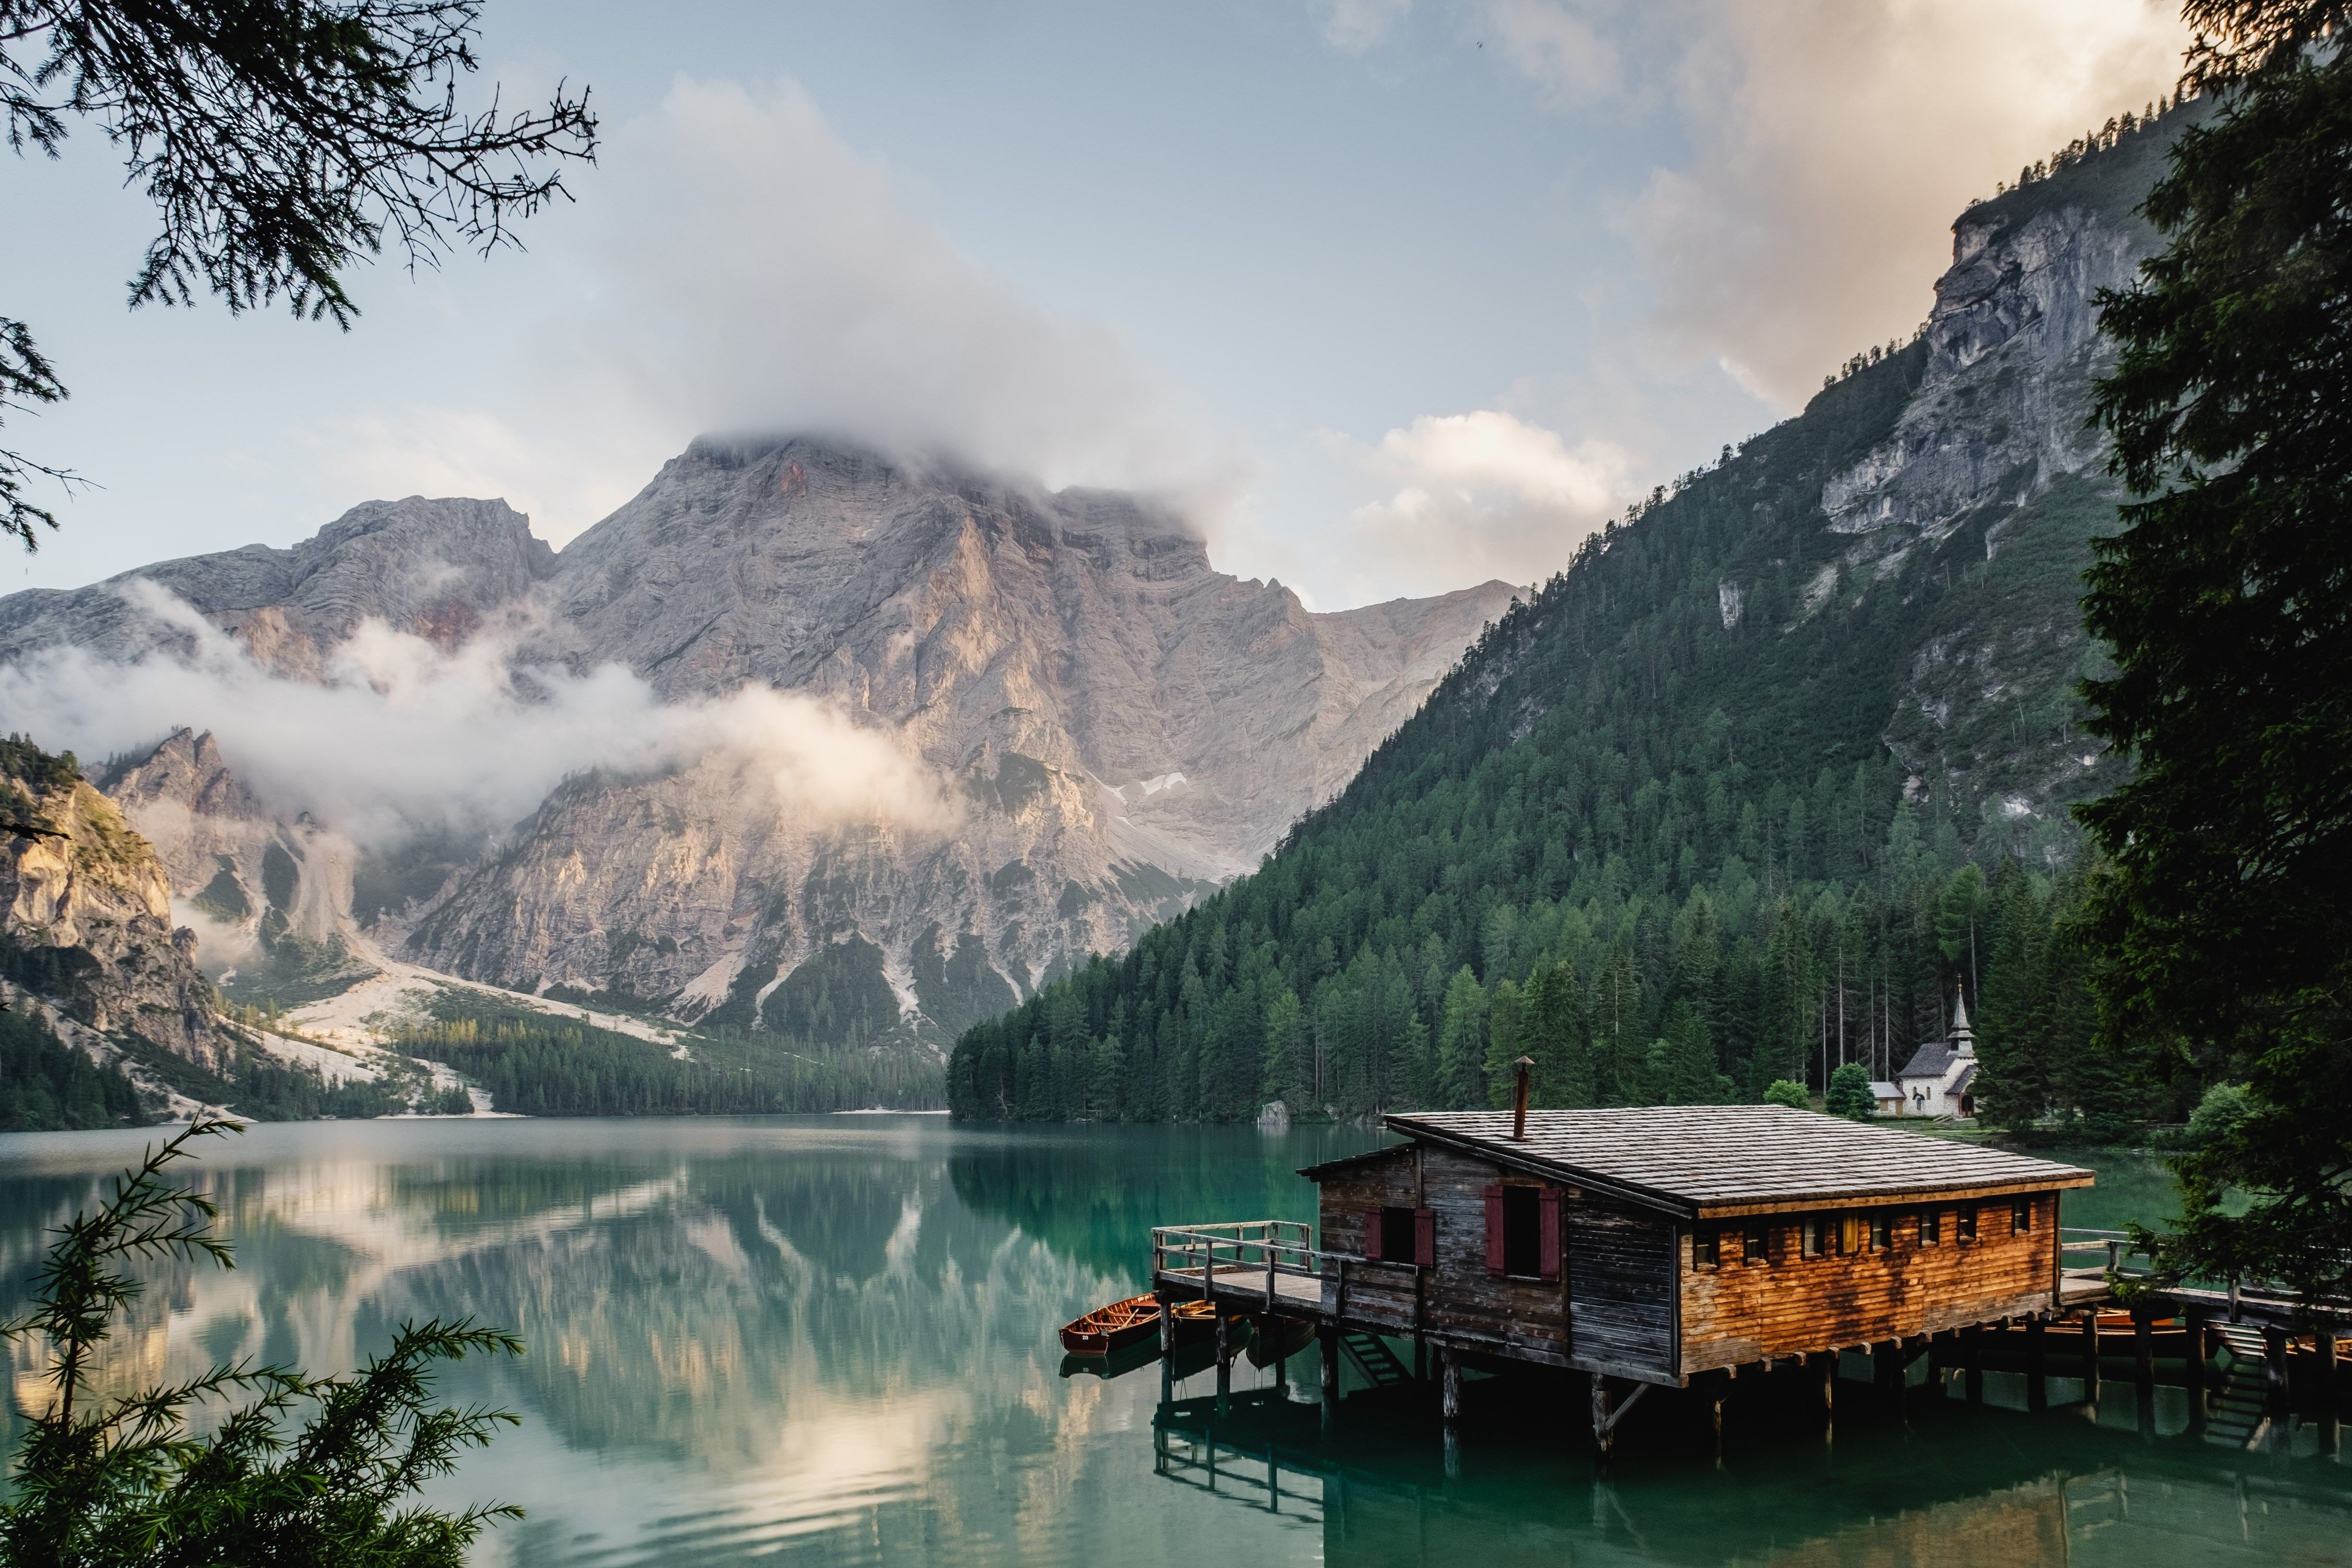 Hq Res Lake Wallpaper Cabin By The Lake, Download